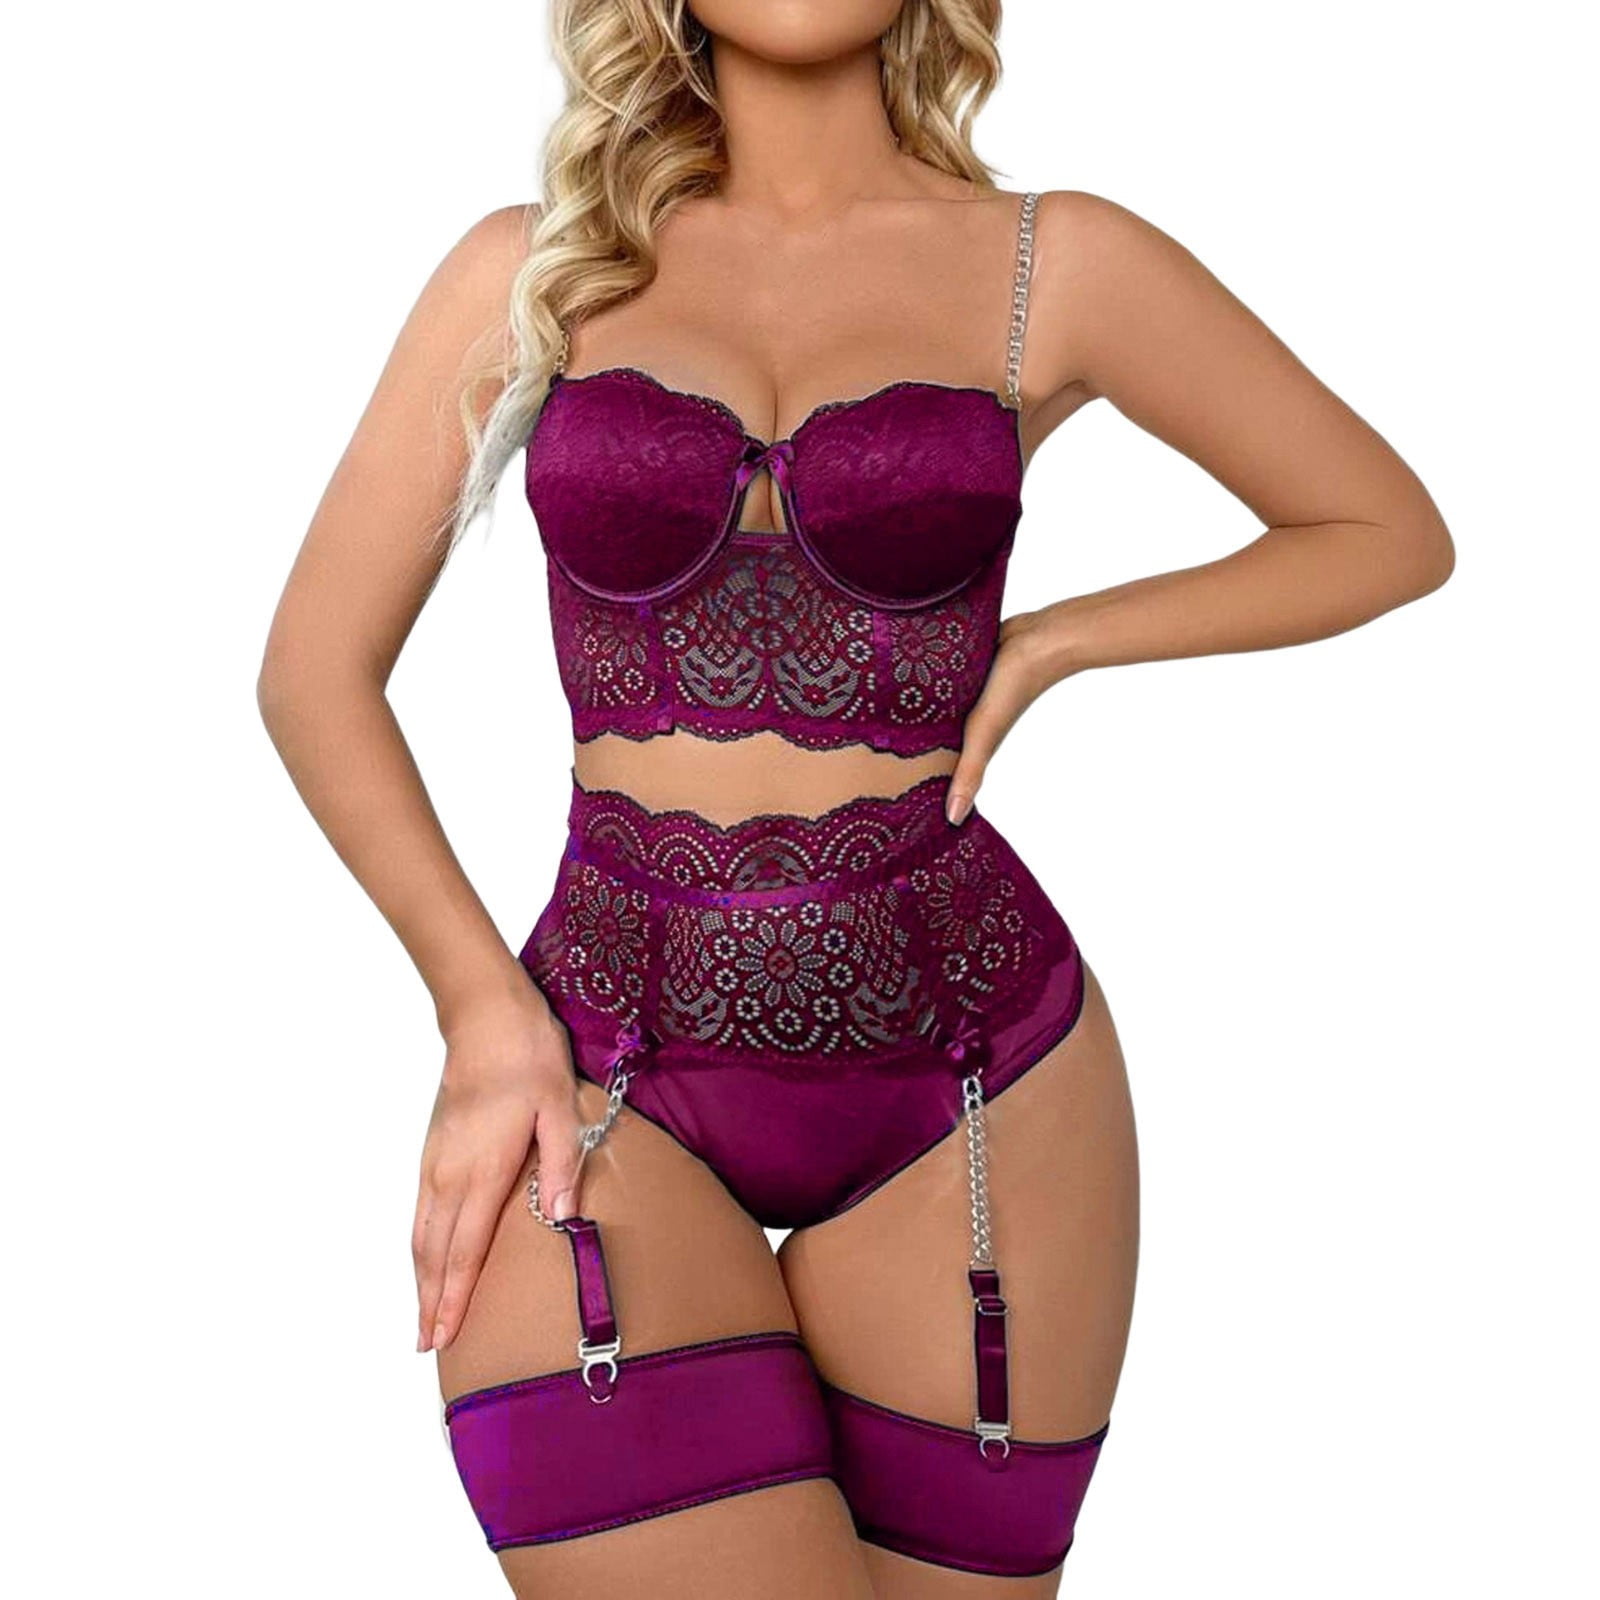 LBECLEY 1/4 Cup Bra Lingerie Plus Size Lace Heart Embroidered Fashion  Lingerie Hollow 3 Piece Garther Lingerie Set for Mature Women Outfits for  Adults